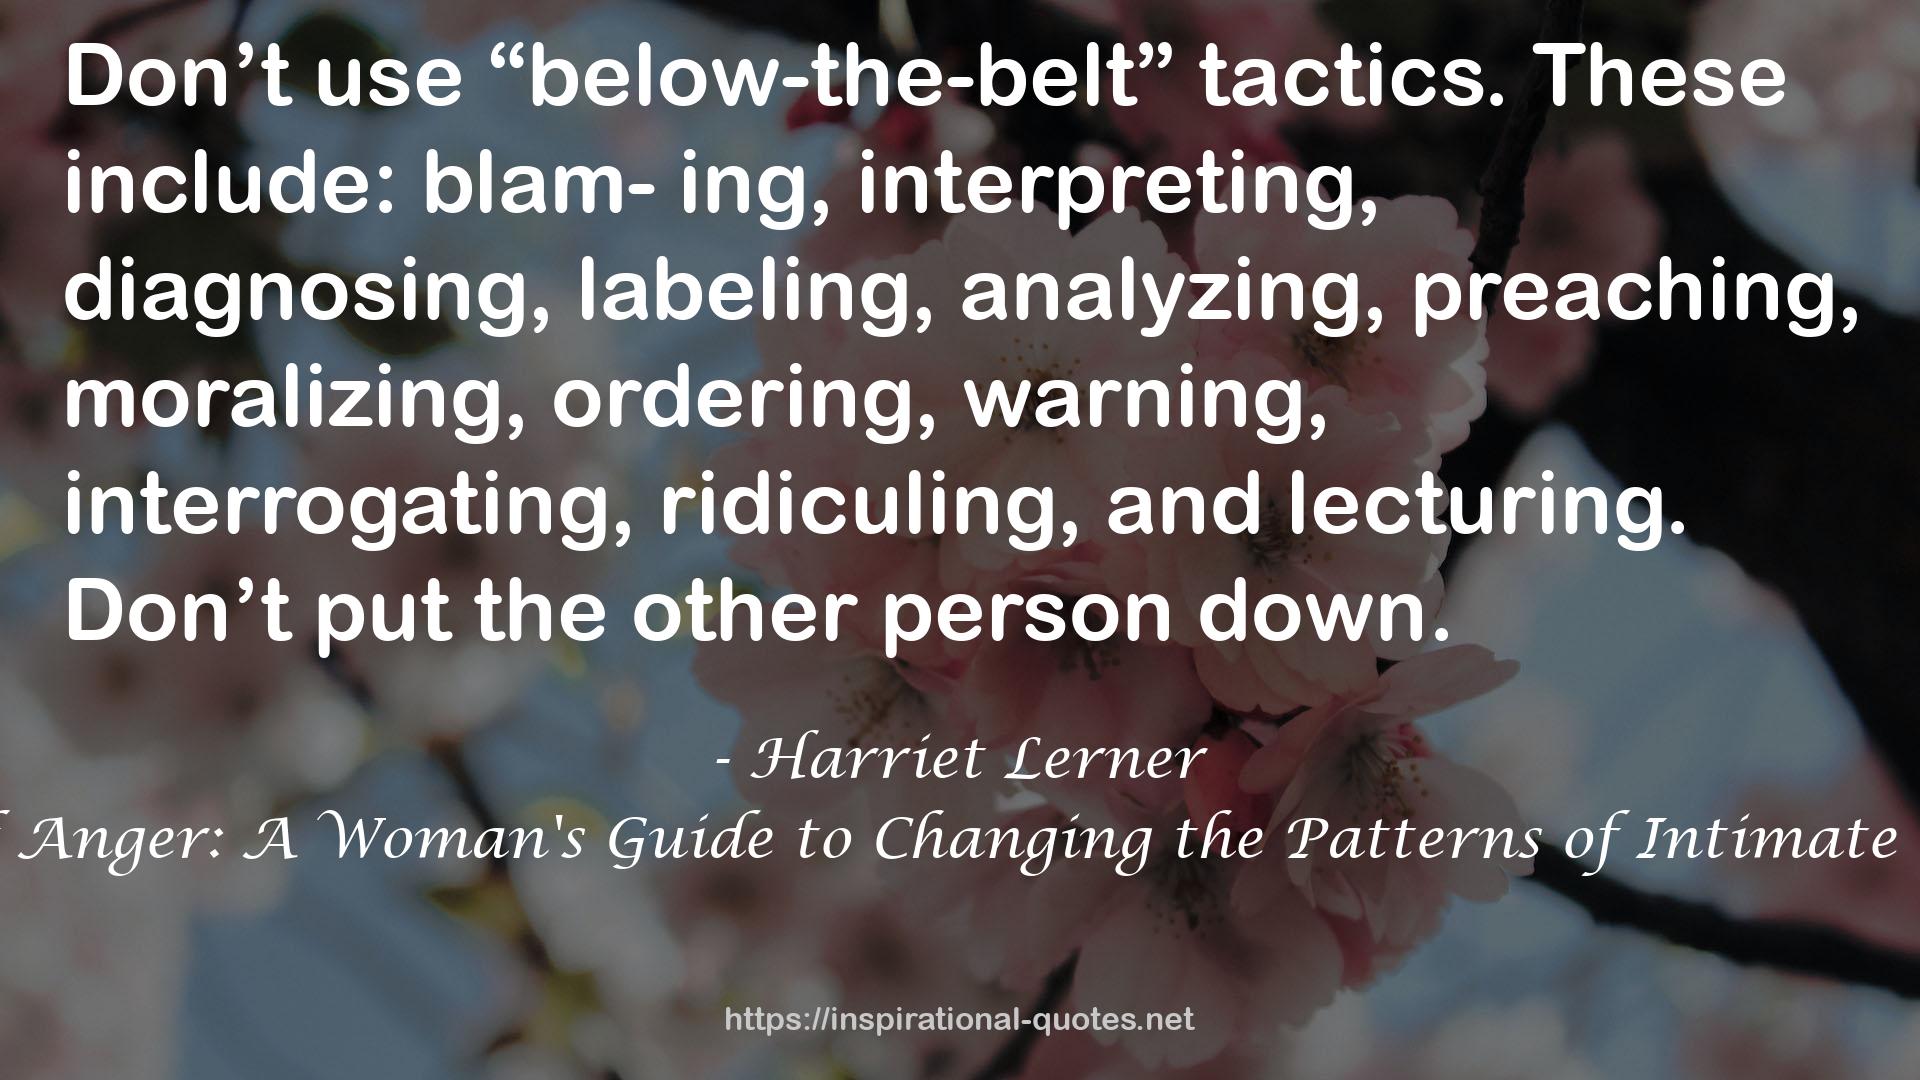 The Dance of Anger: A Woman's Guide to Changing the Patterns of Intimate Relationships QUOTES